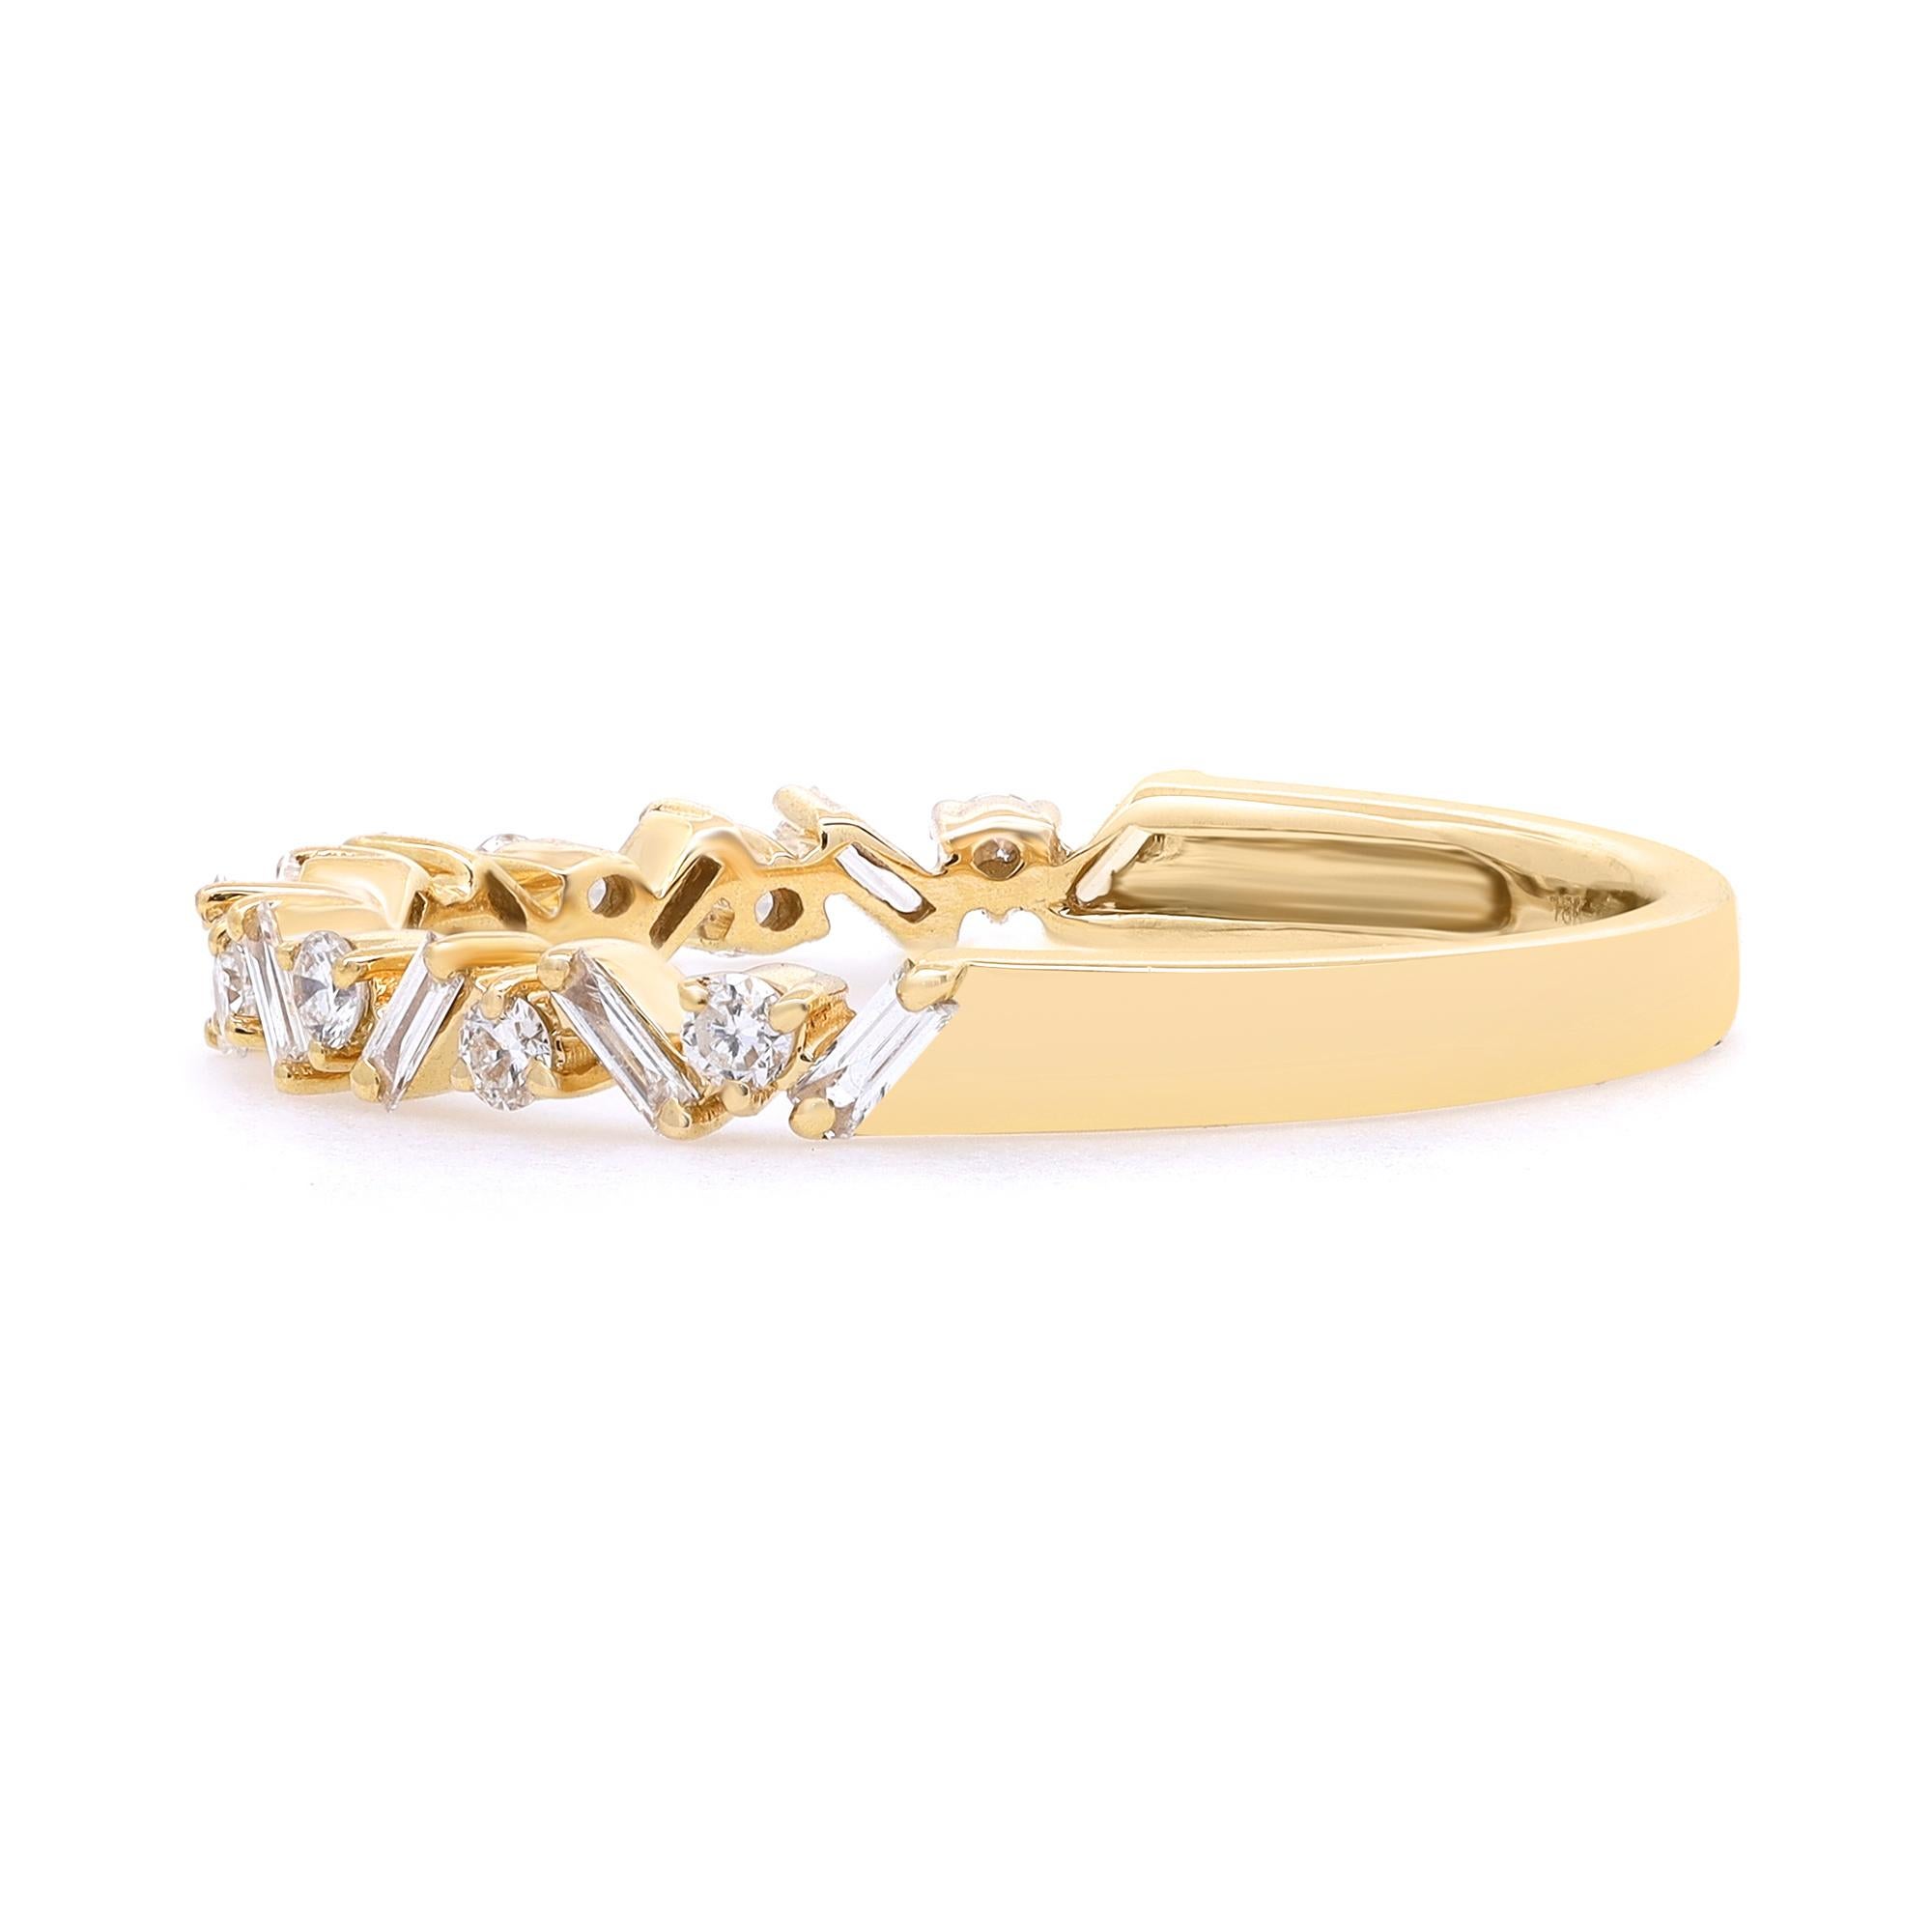 Simple and delicate diamond ring crafted in 18k yellow gold. This ring features prong set baguette cut diamonds set in a zig-zag pattern portraying a timeless, eye-catching style. It's stackable and easy to mix and match. Total diamond weight: